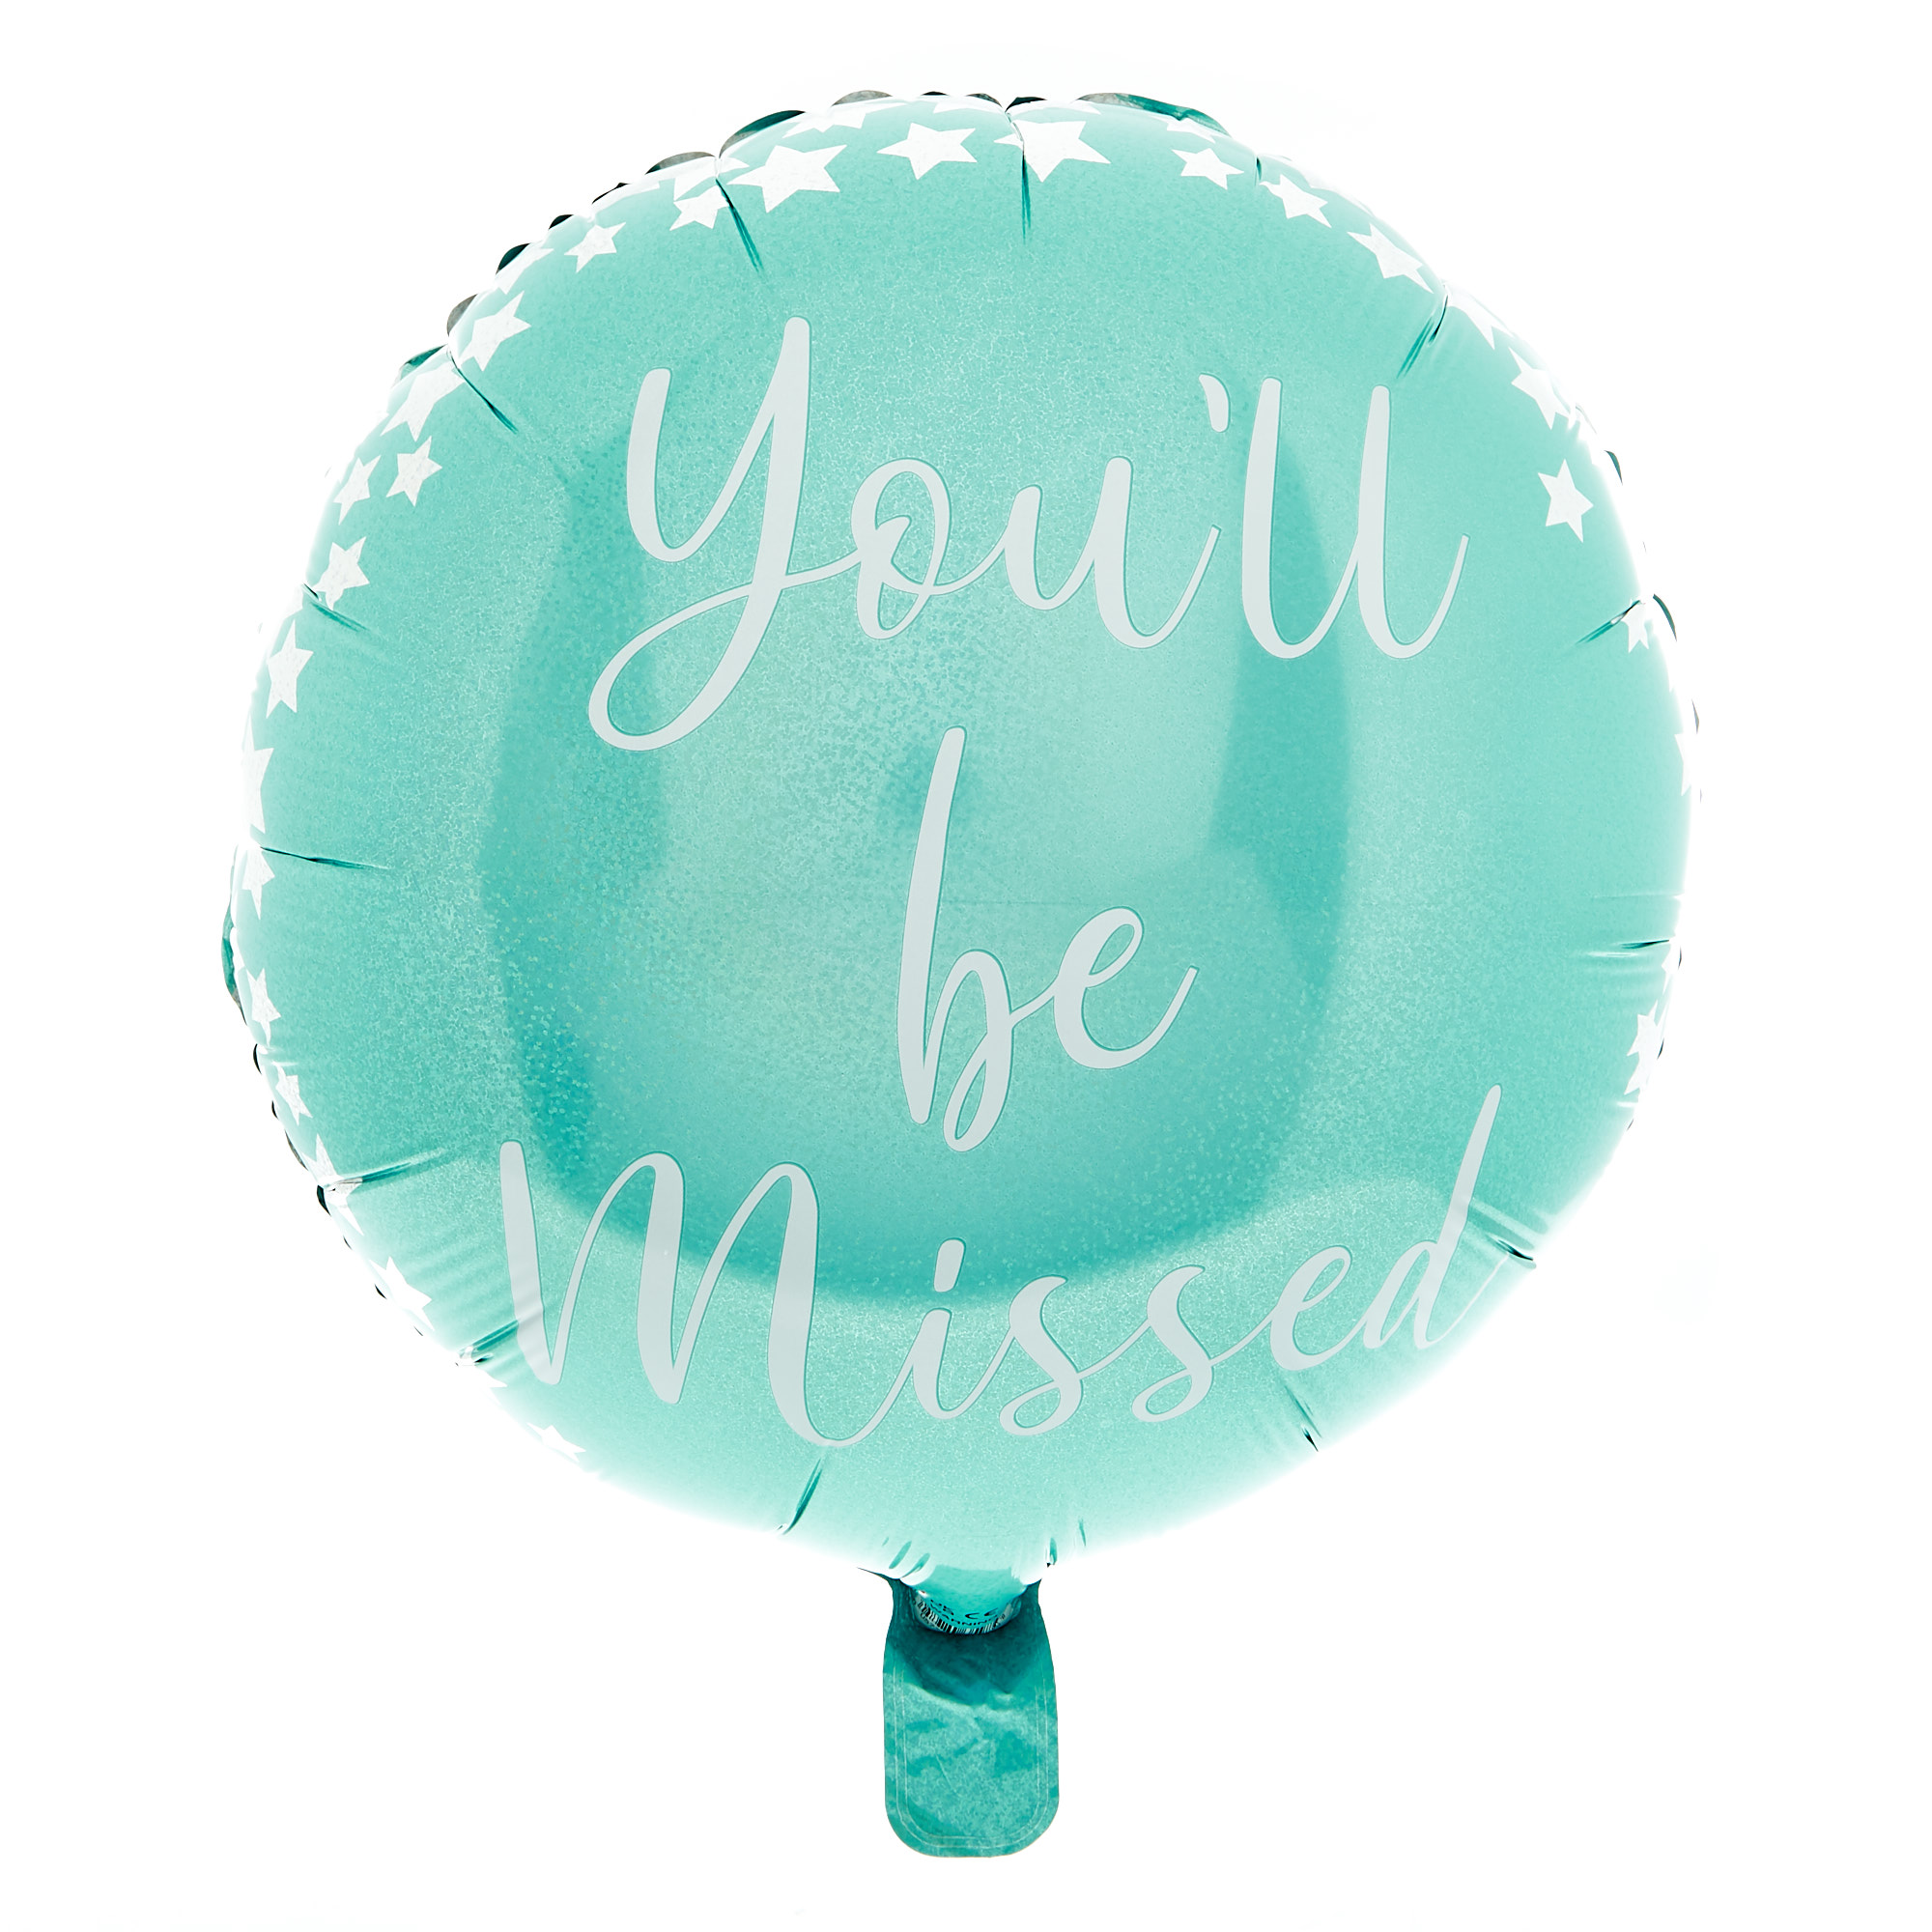 You'll Be Missed Balloon & Lindt Chocolate Box - FREE GIFT CARD!